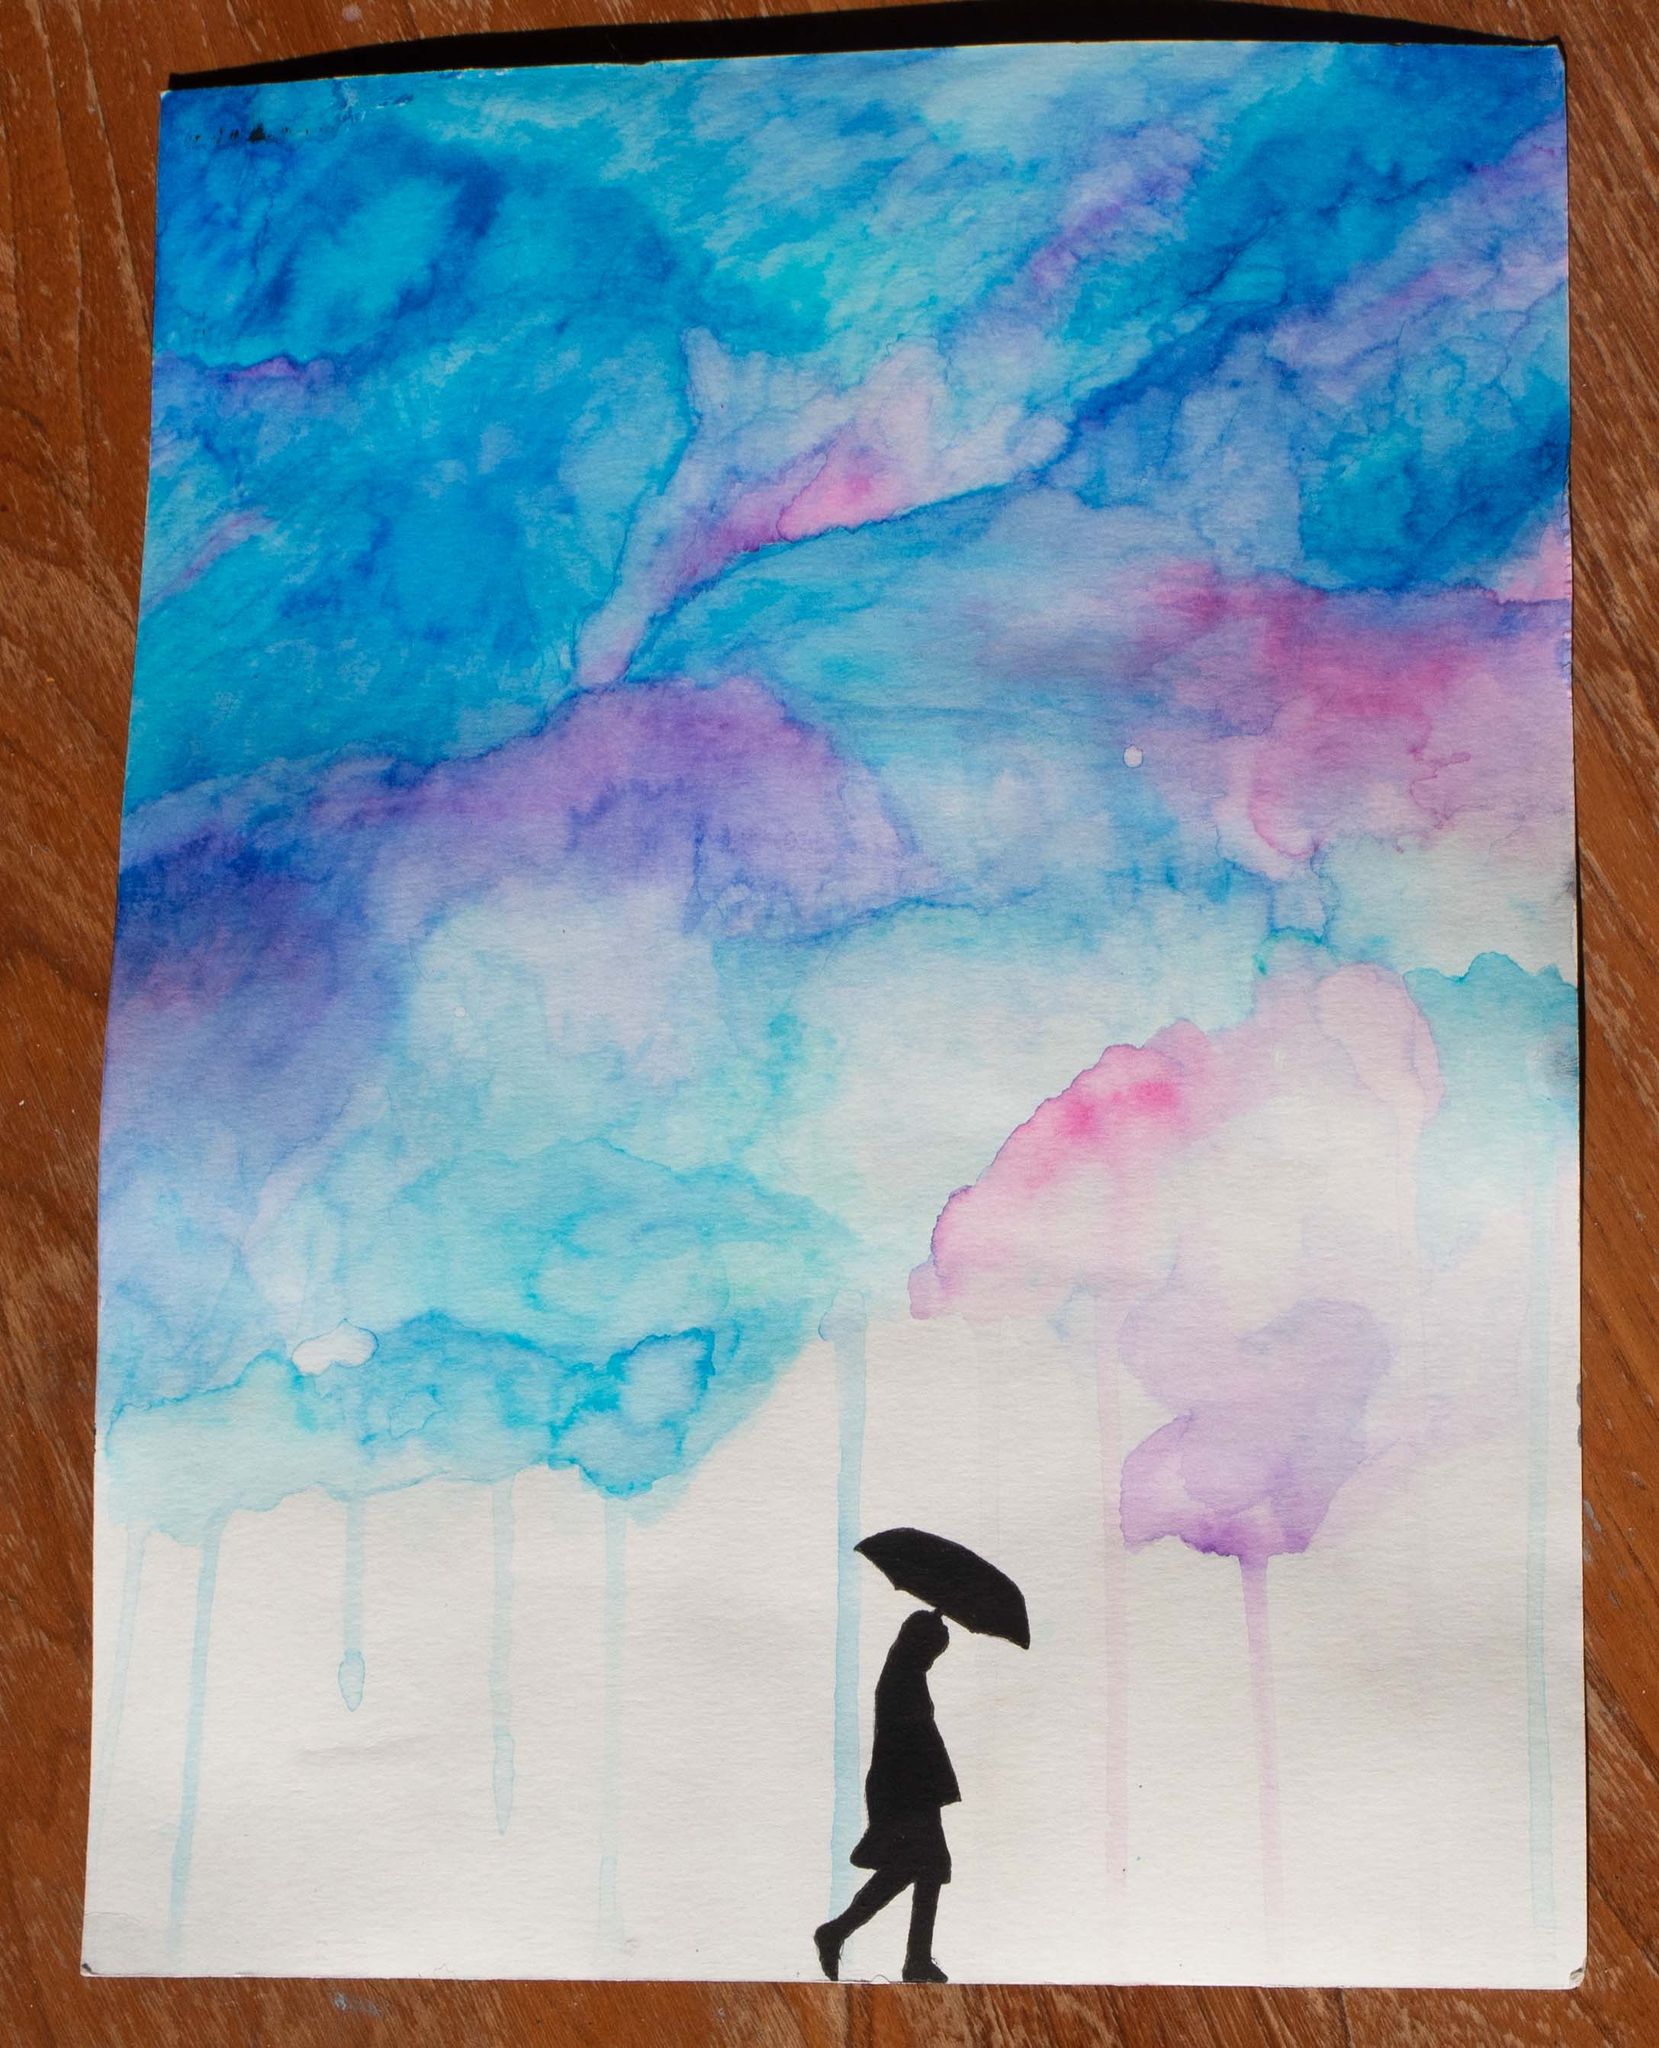 Close up product image of a watercolour painting of blue and pink clouds raining onto the silhouette of a person holding an umbrella,